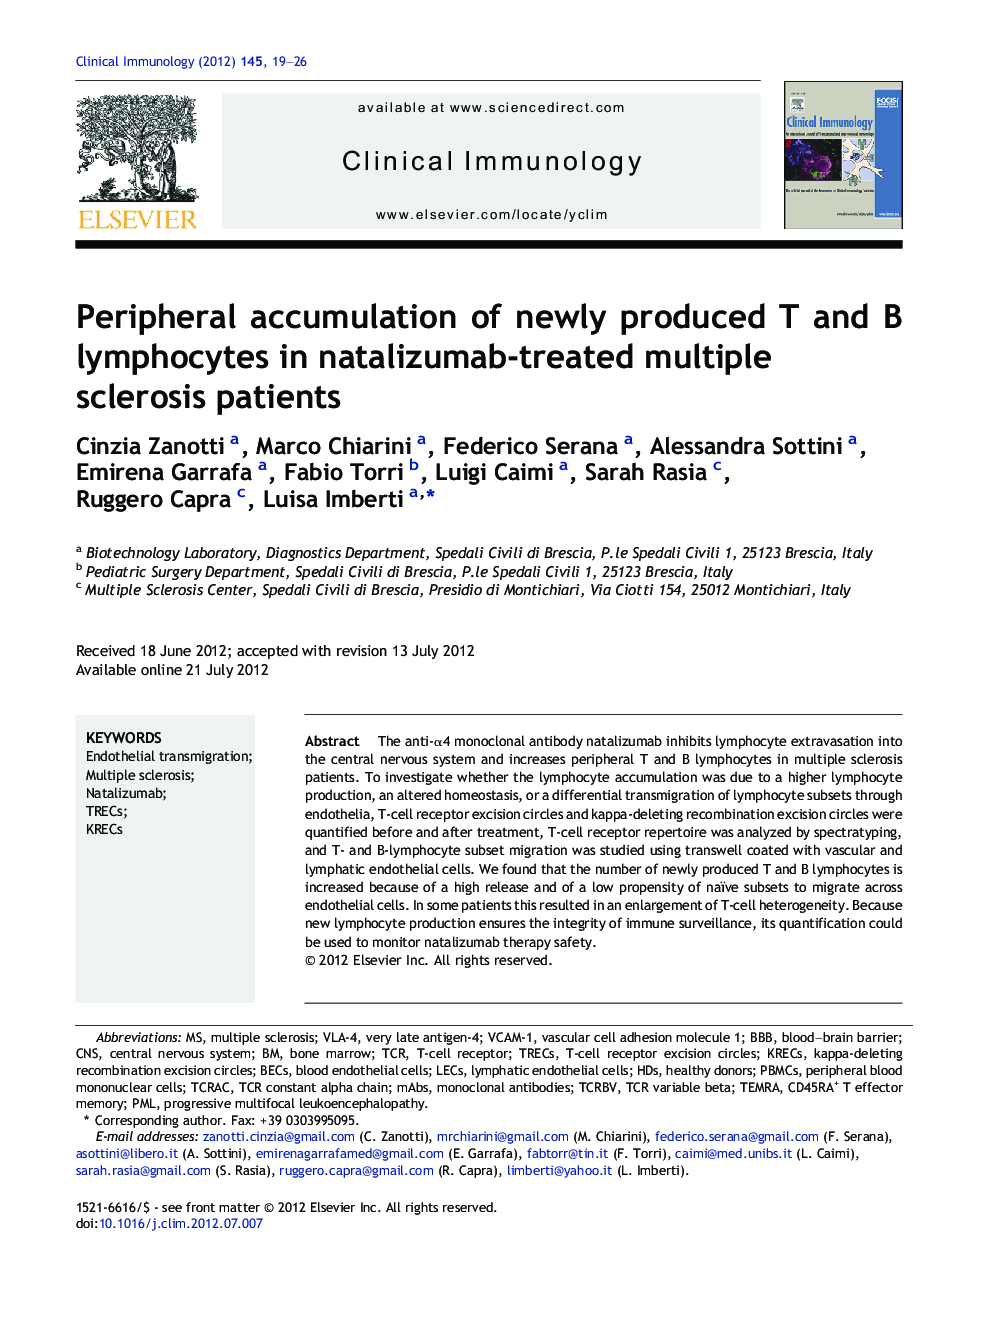 Peripheral accumulation of newly produced T and B lymphocytes in natalizumab-treated multiple sclerosis patients